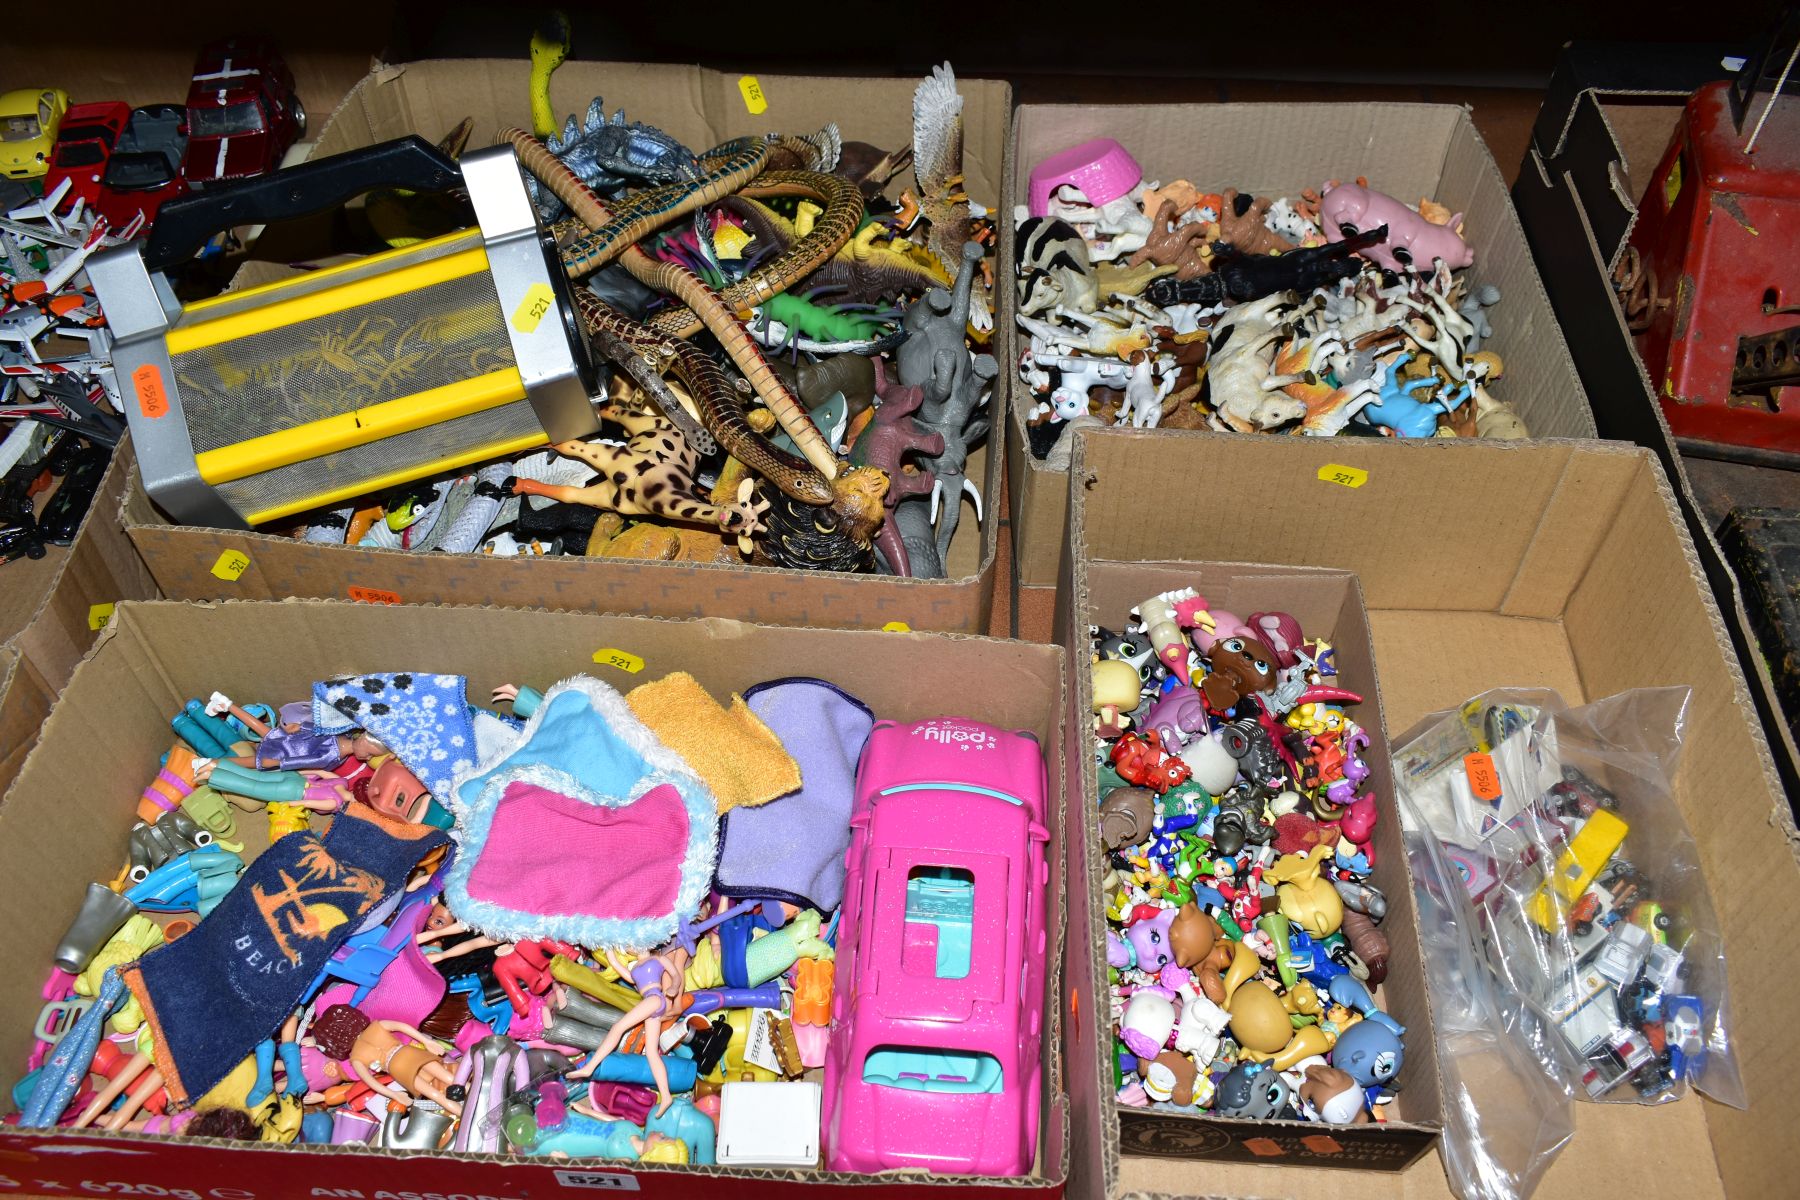 A QUANTITY OF UNBOXED AND ASSORTED MAINLY PLASTIC FIGURES AND ACCESSORIES, to include Polly